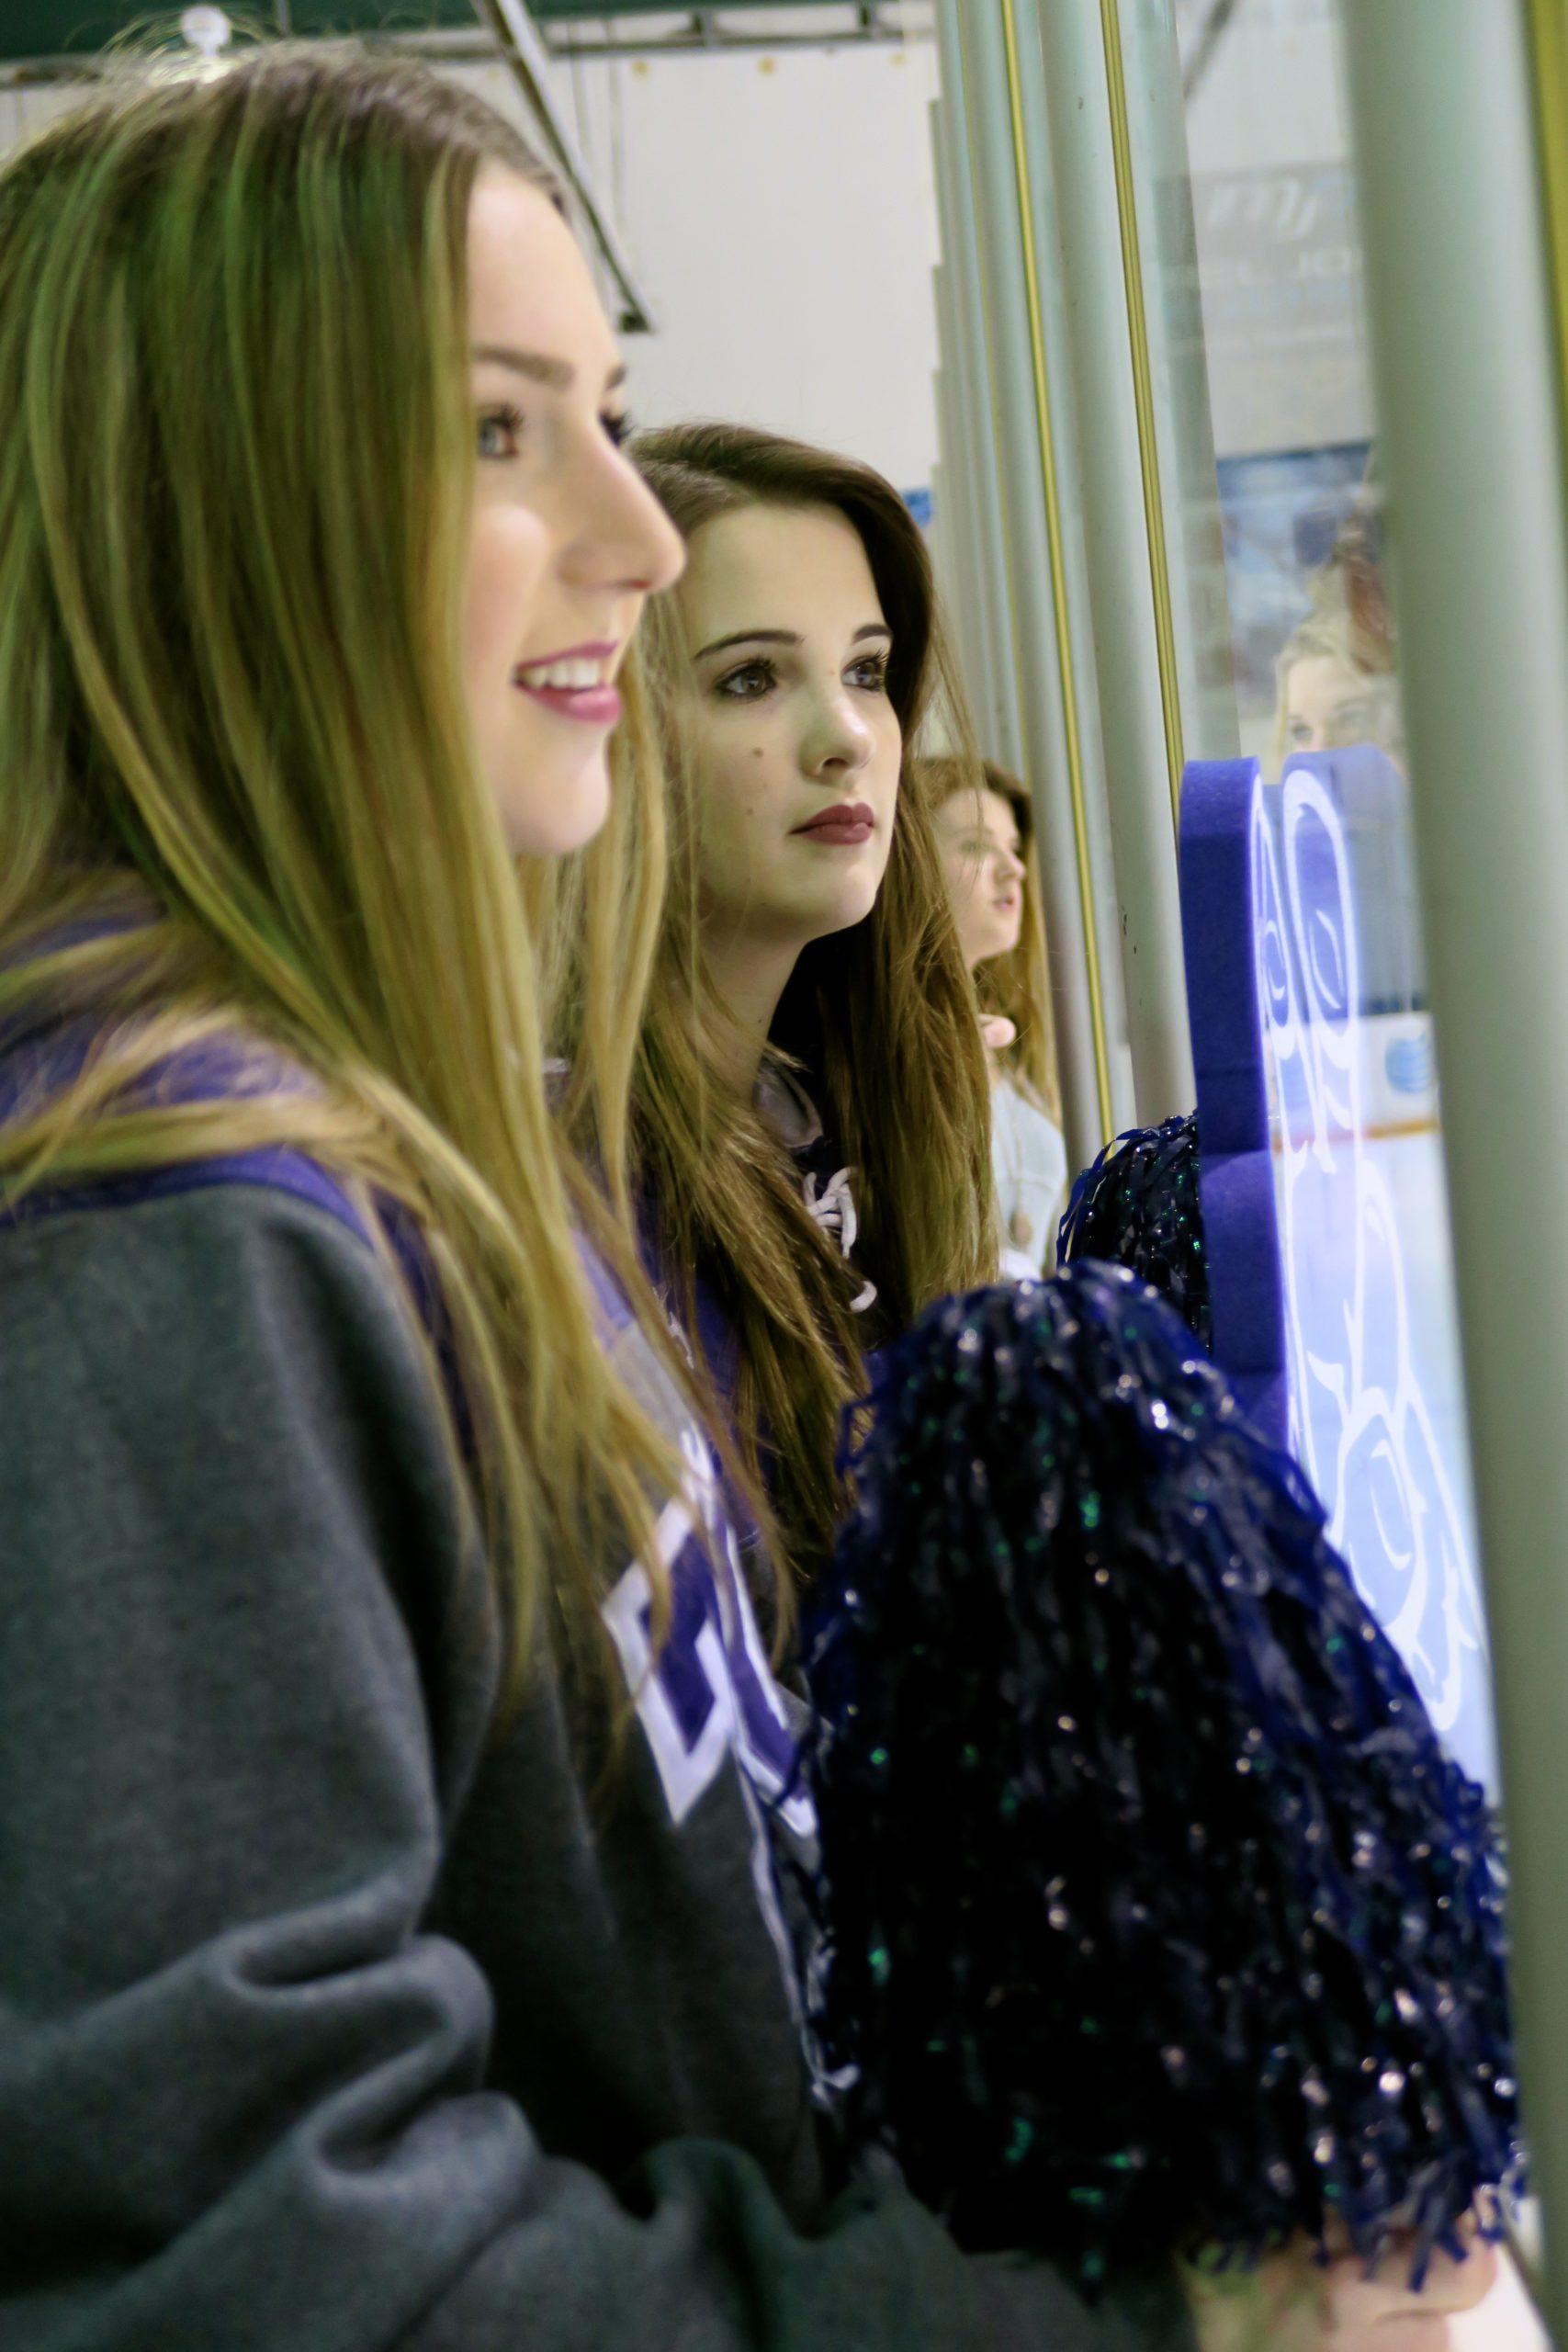 TCU+Ice+Girls+help+double+the+crowd+size+at+mens+club+ice+hockey+games.+